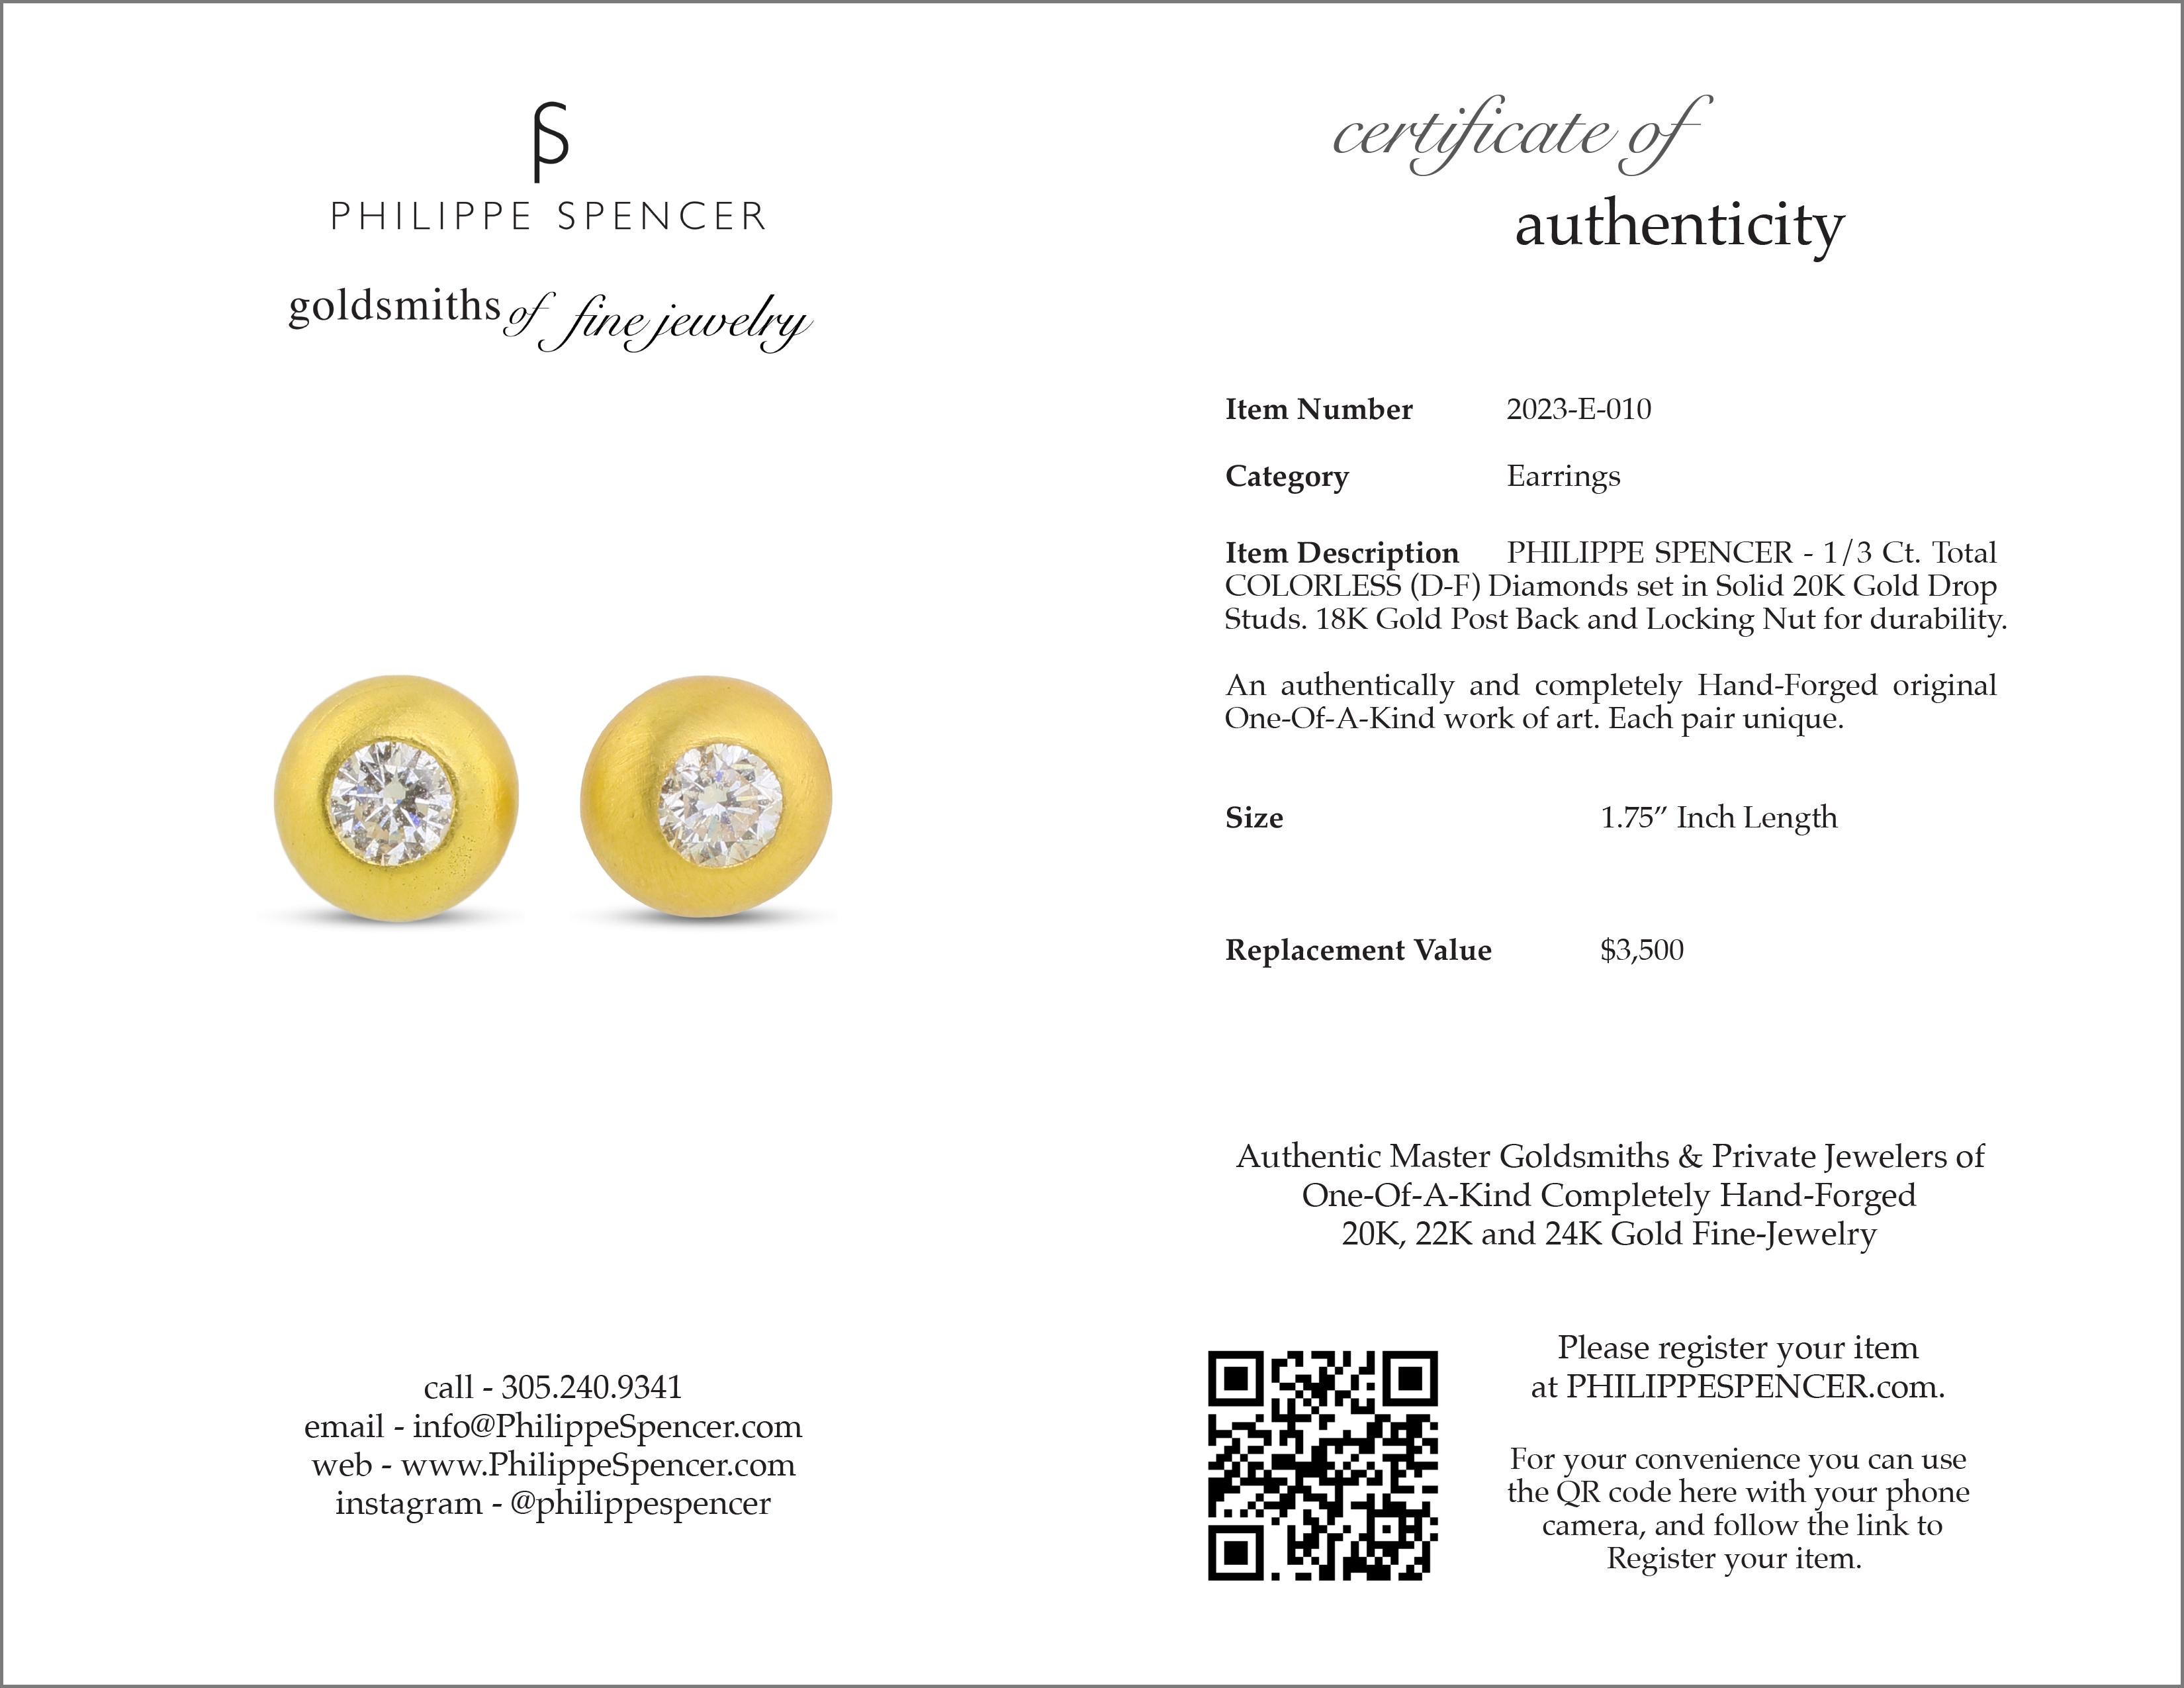 Round Cut PHILIPPE SPENCER 1/3 Ct. Tw. COLORLESS Diamond 20K Gold Drop Stud Earrings For Sale